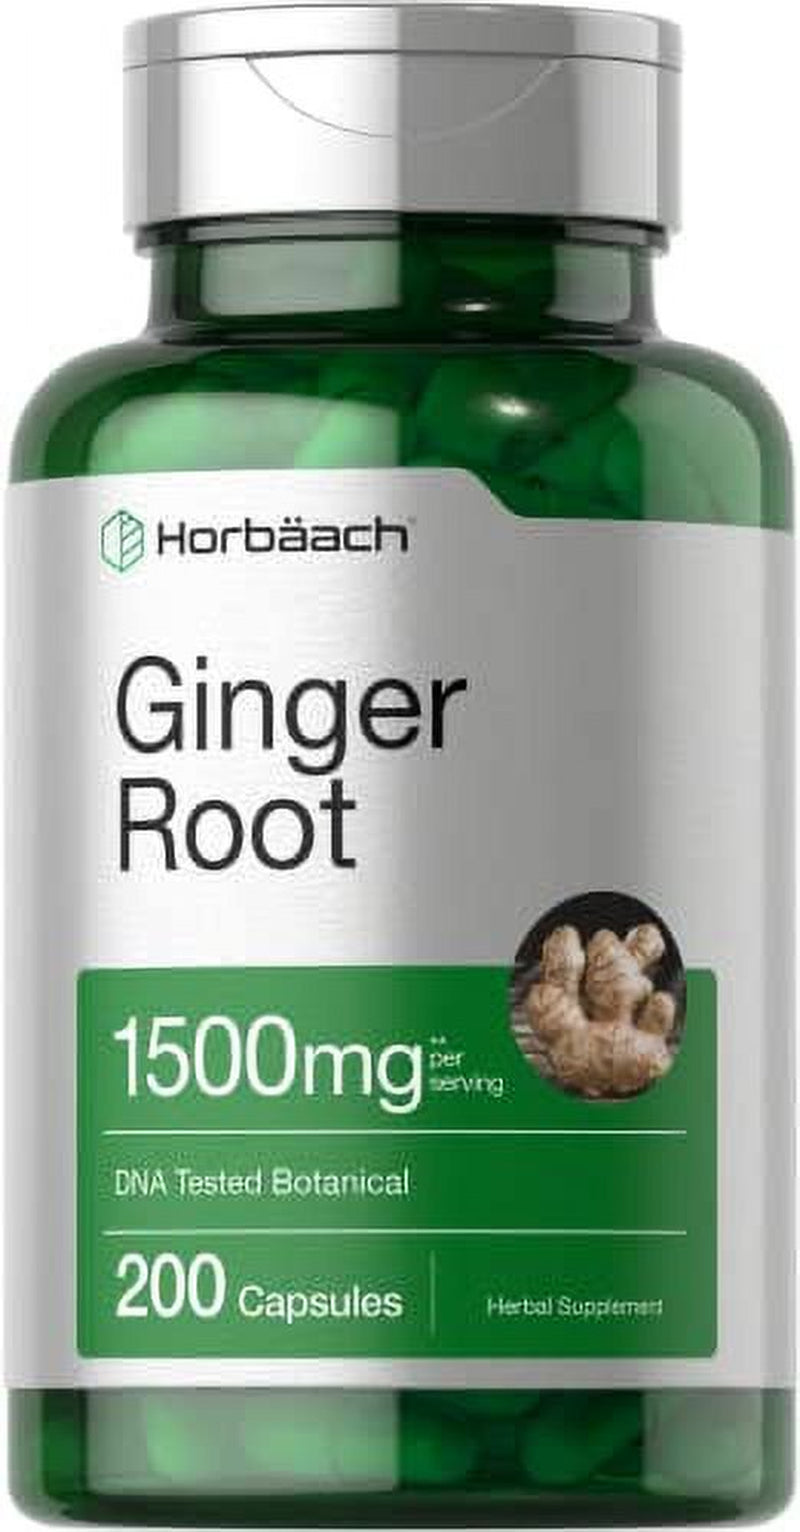 Ginger Root Capsules 1500 Mg | 200 Count | DNA Tested, Non-Gmo, Gluten Free | Ginger Root Extract | by Horbaach